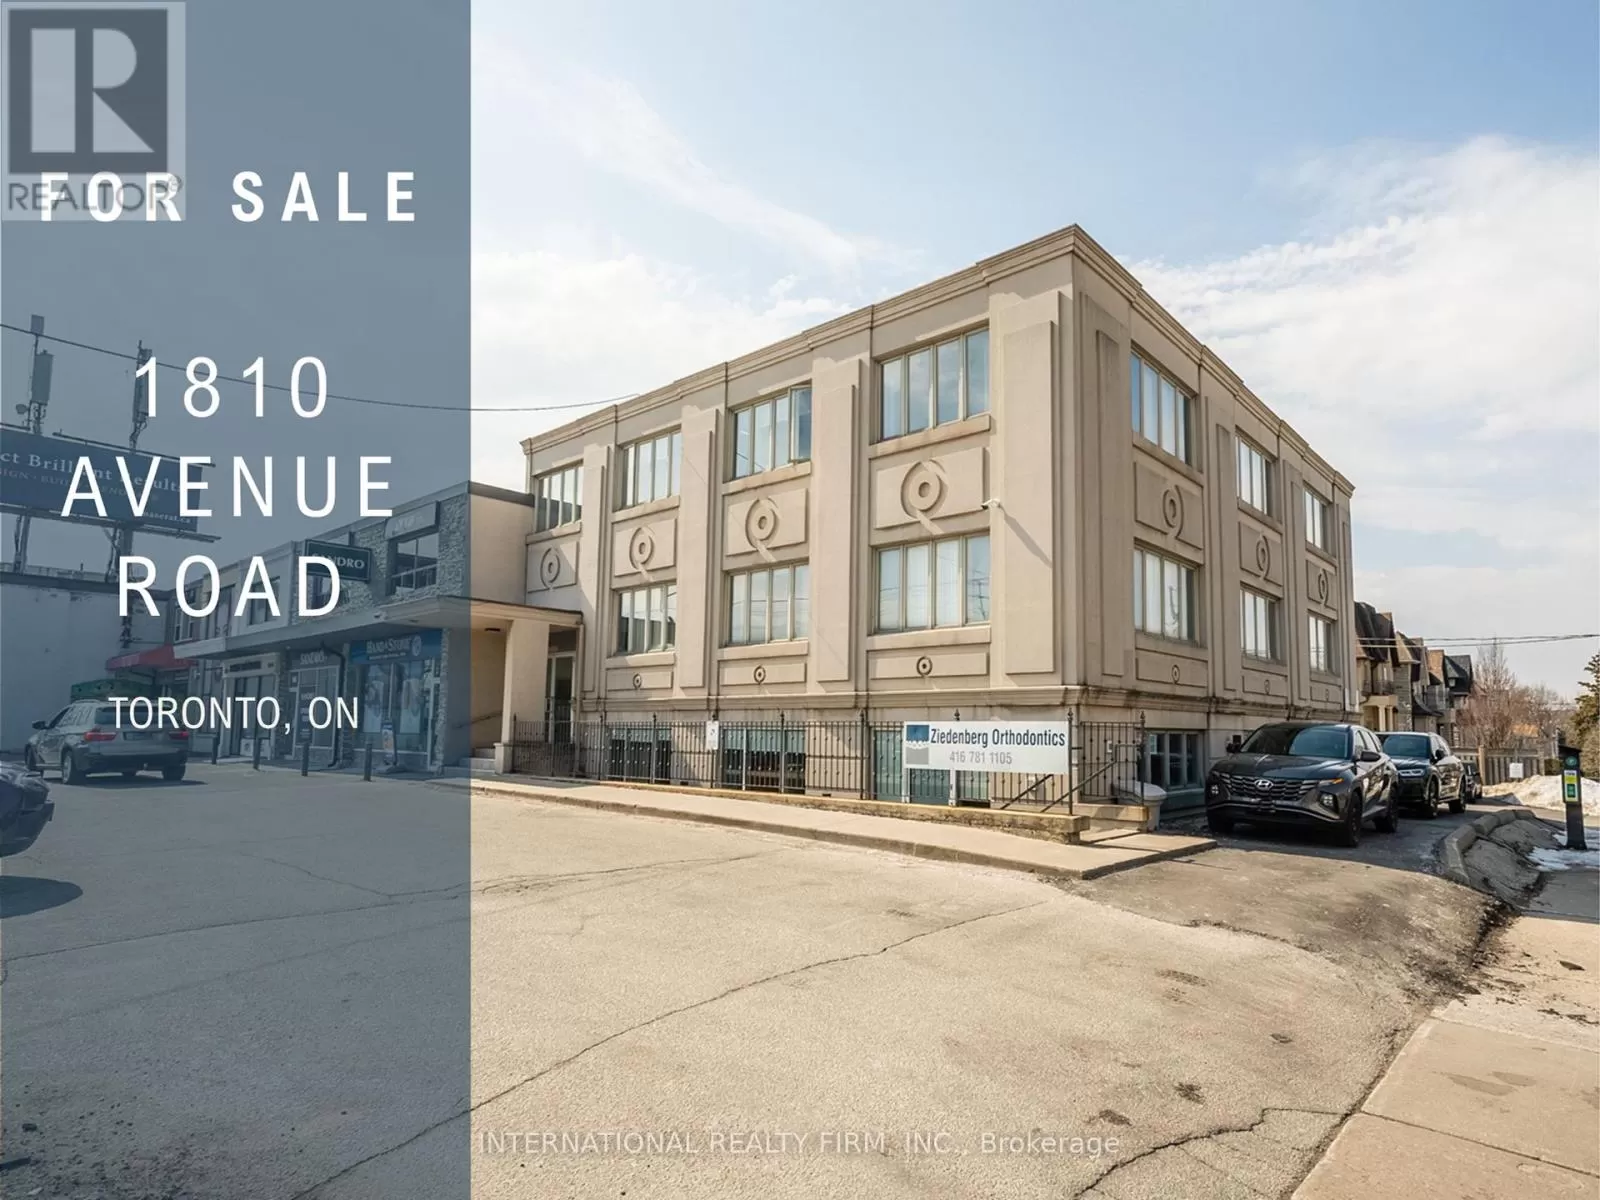 Offices for rent: 1810 Avenue Road, Toronto, Ontario M5M 3Z2